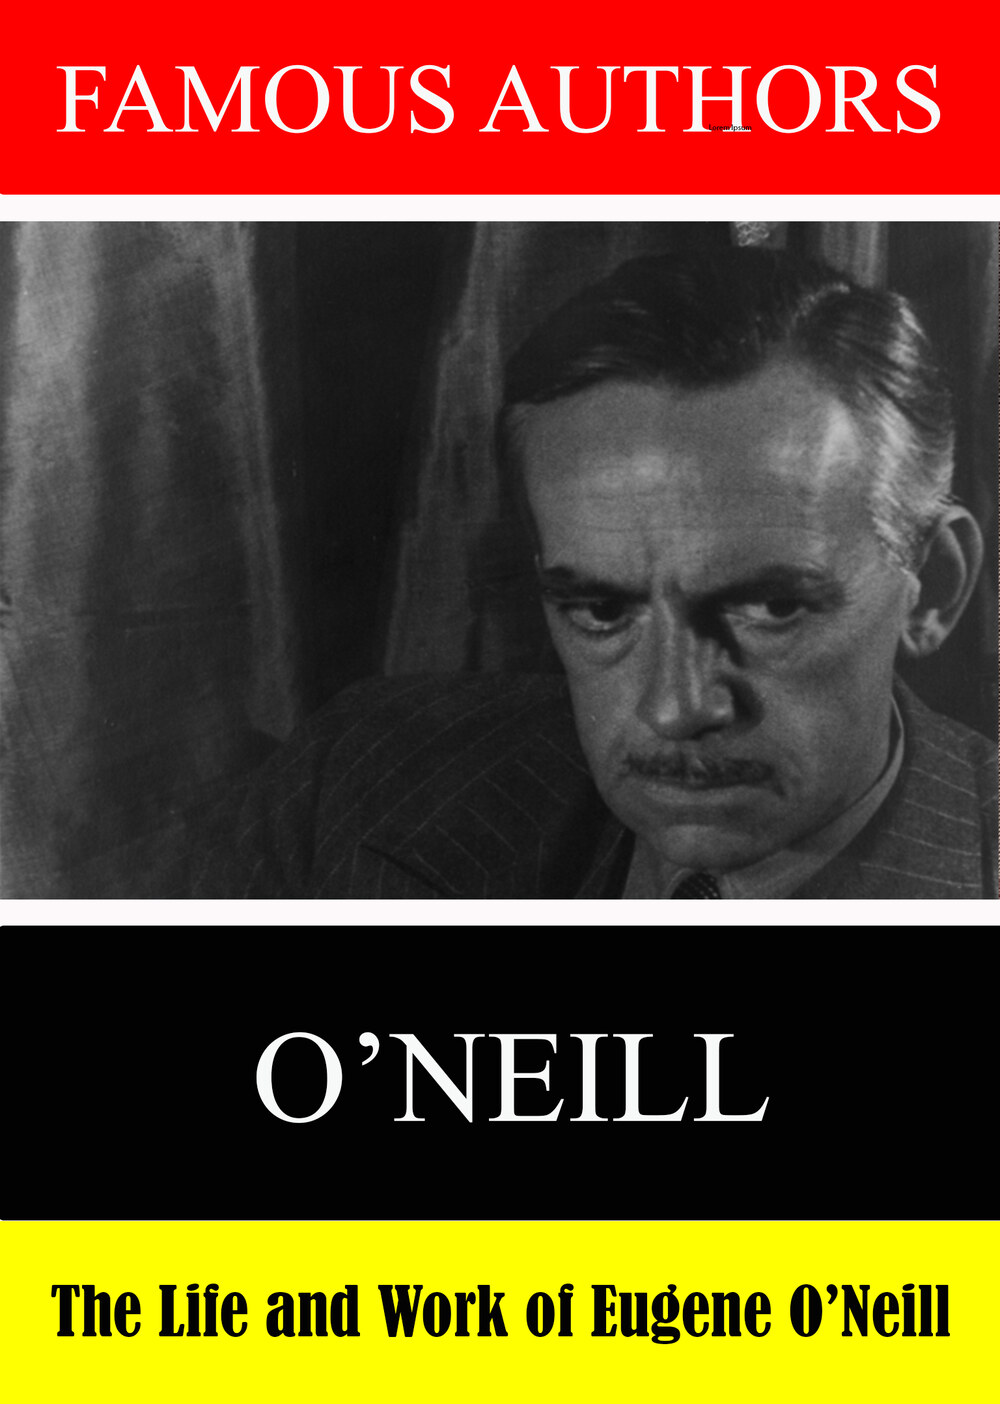 L7899 - Famous Authors: The Life and Work of  Eugene o"Neill